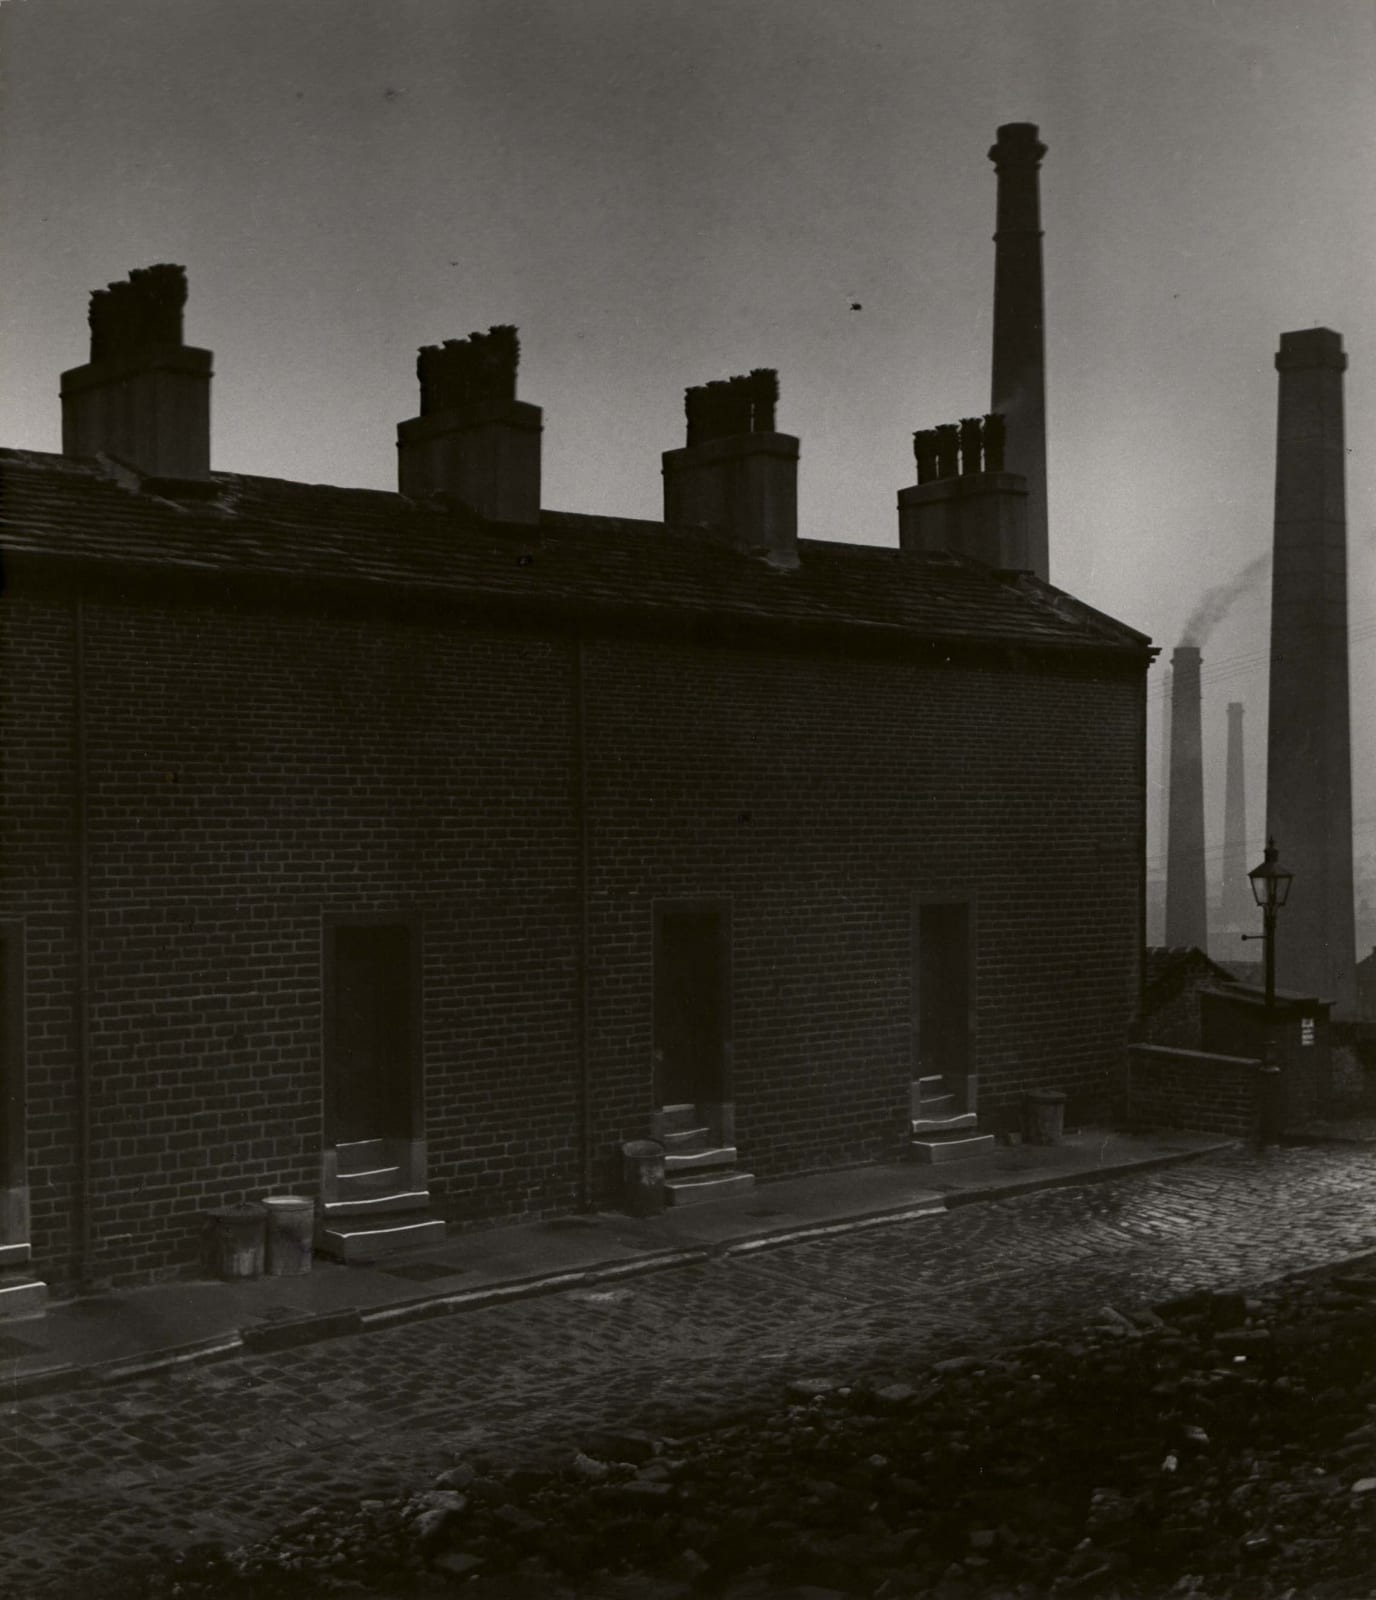 Bill Brandt, Coal-Miners’ Houses Without Windows to the Street, 1937